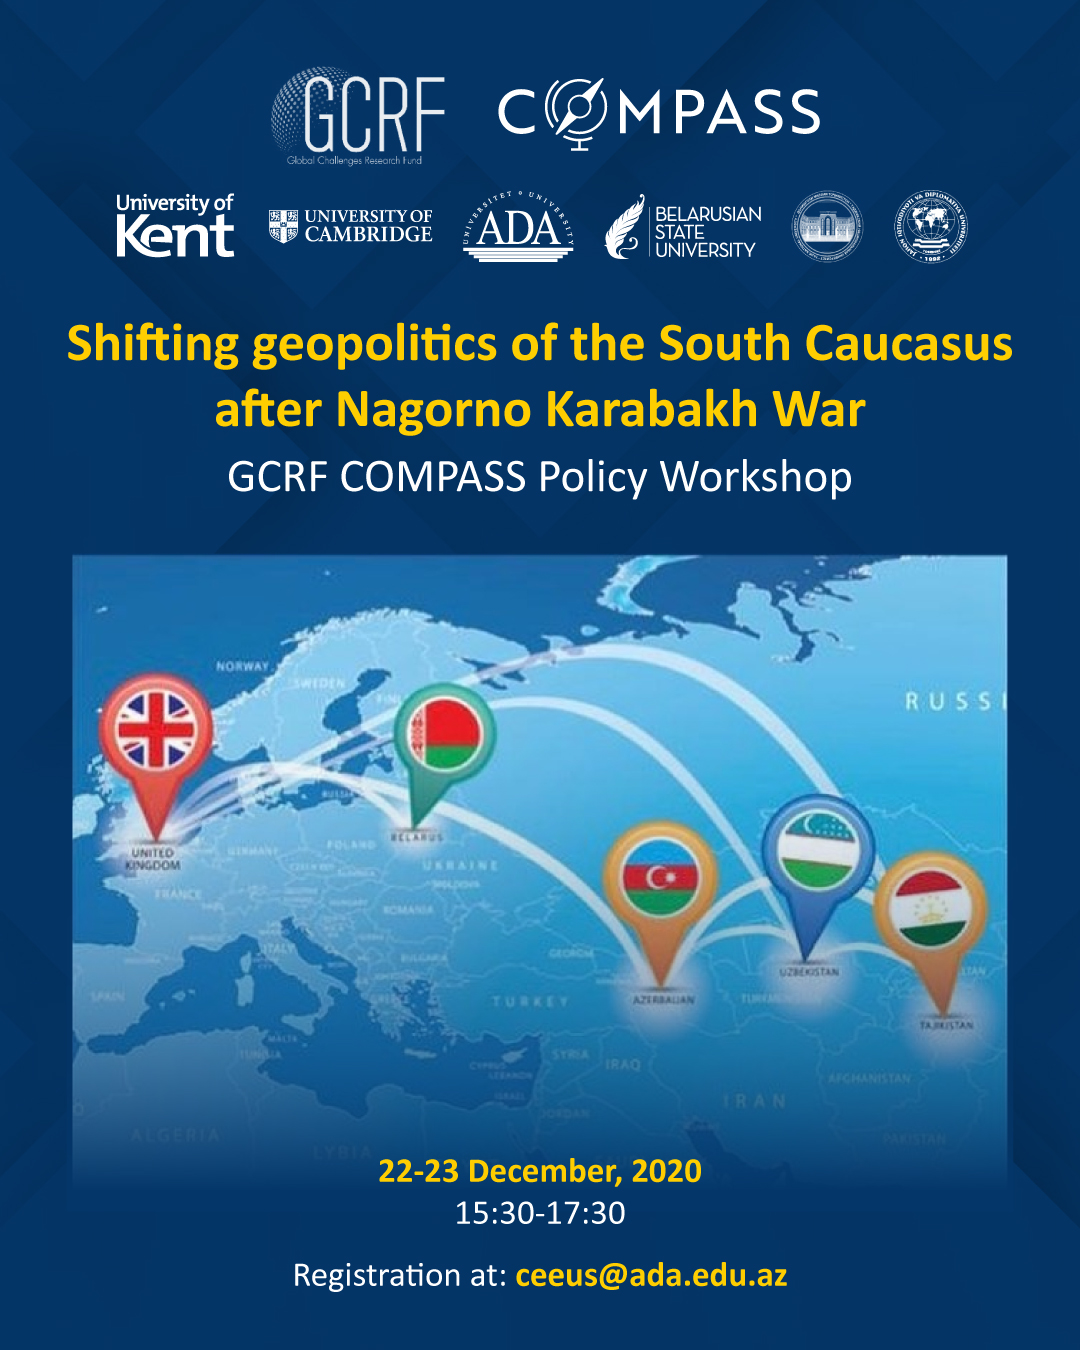 GCRF COMPASS Policy Workshop